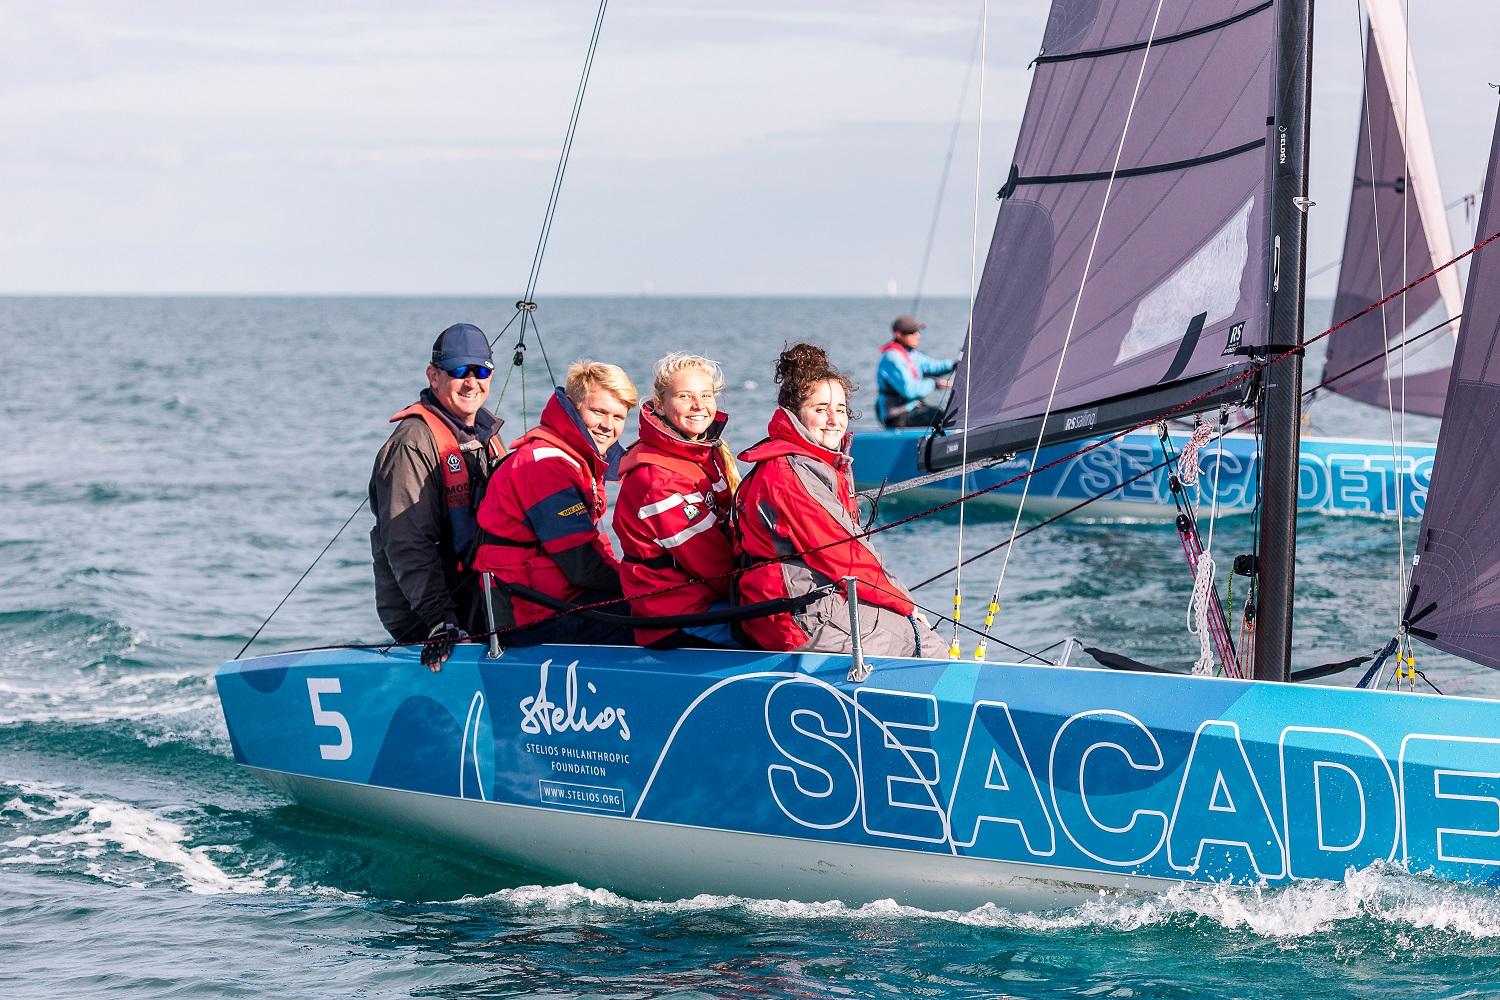 Sea Cadets training on an Rs21 yacht at Weymouth